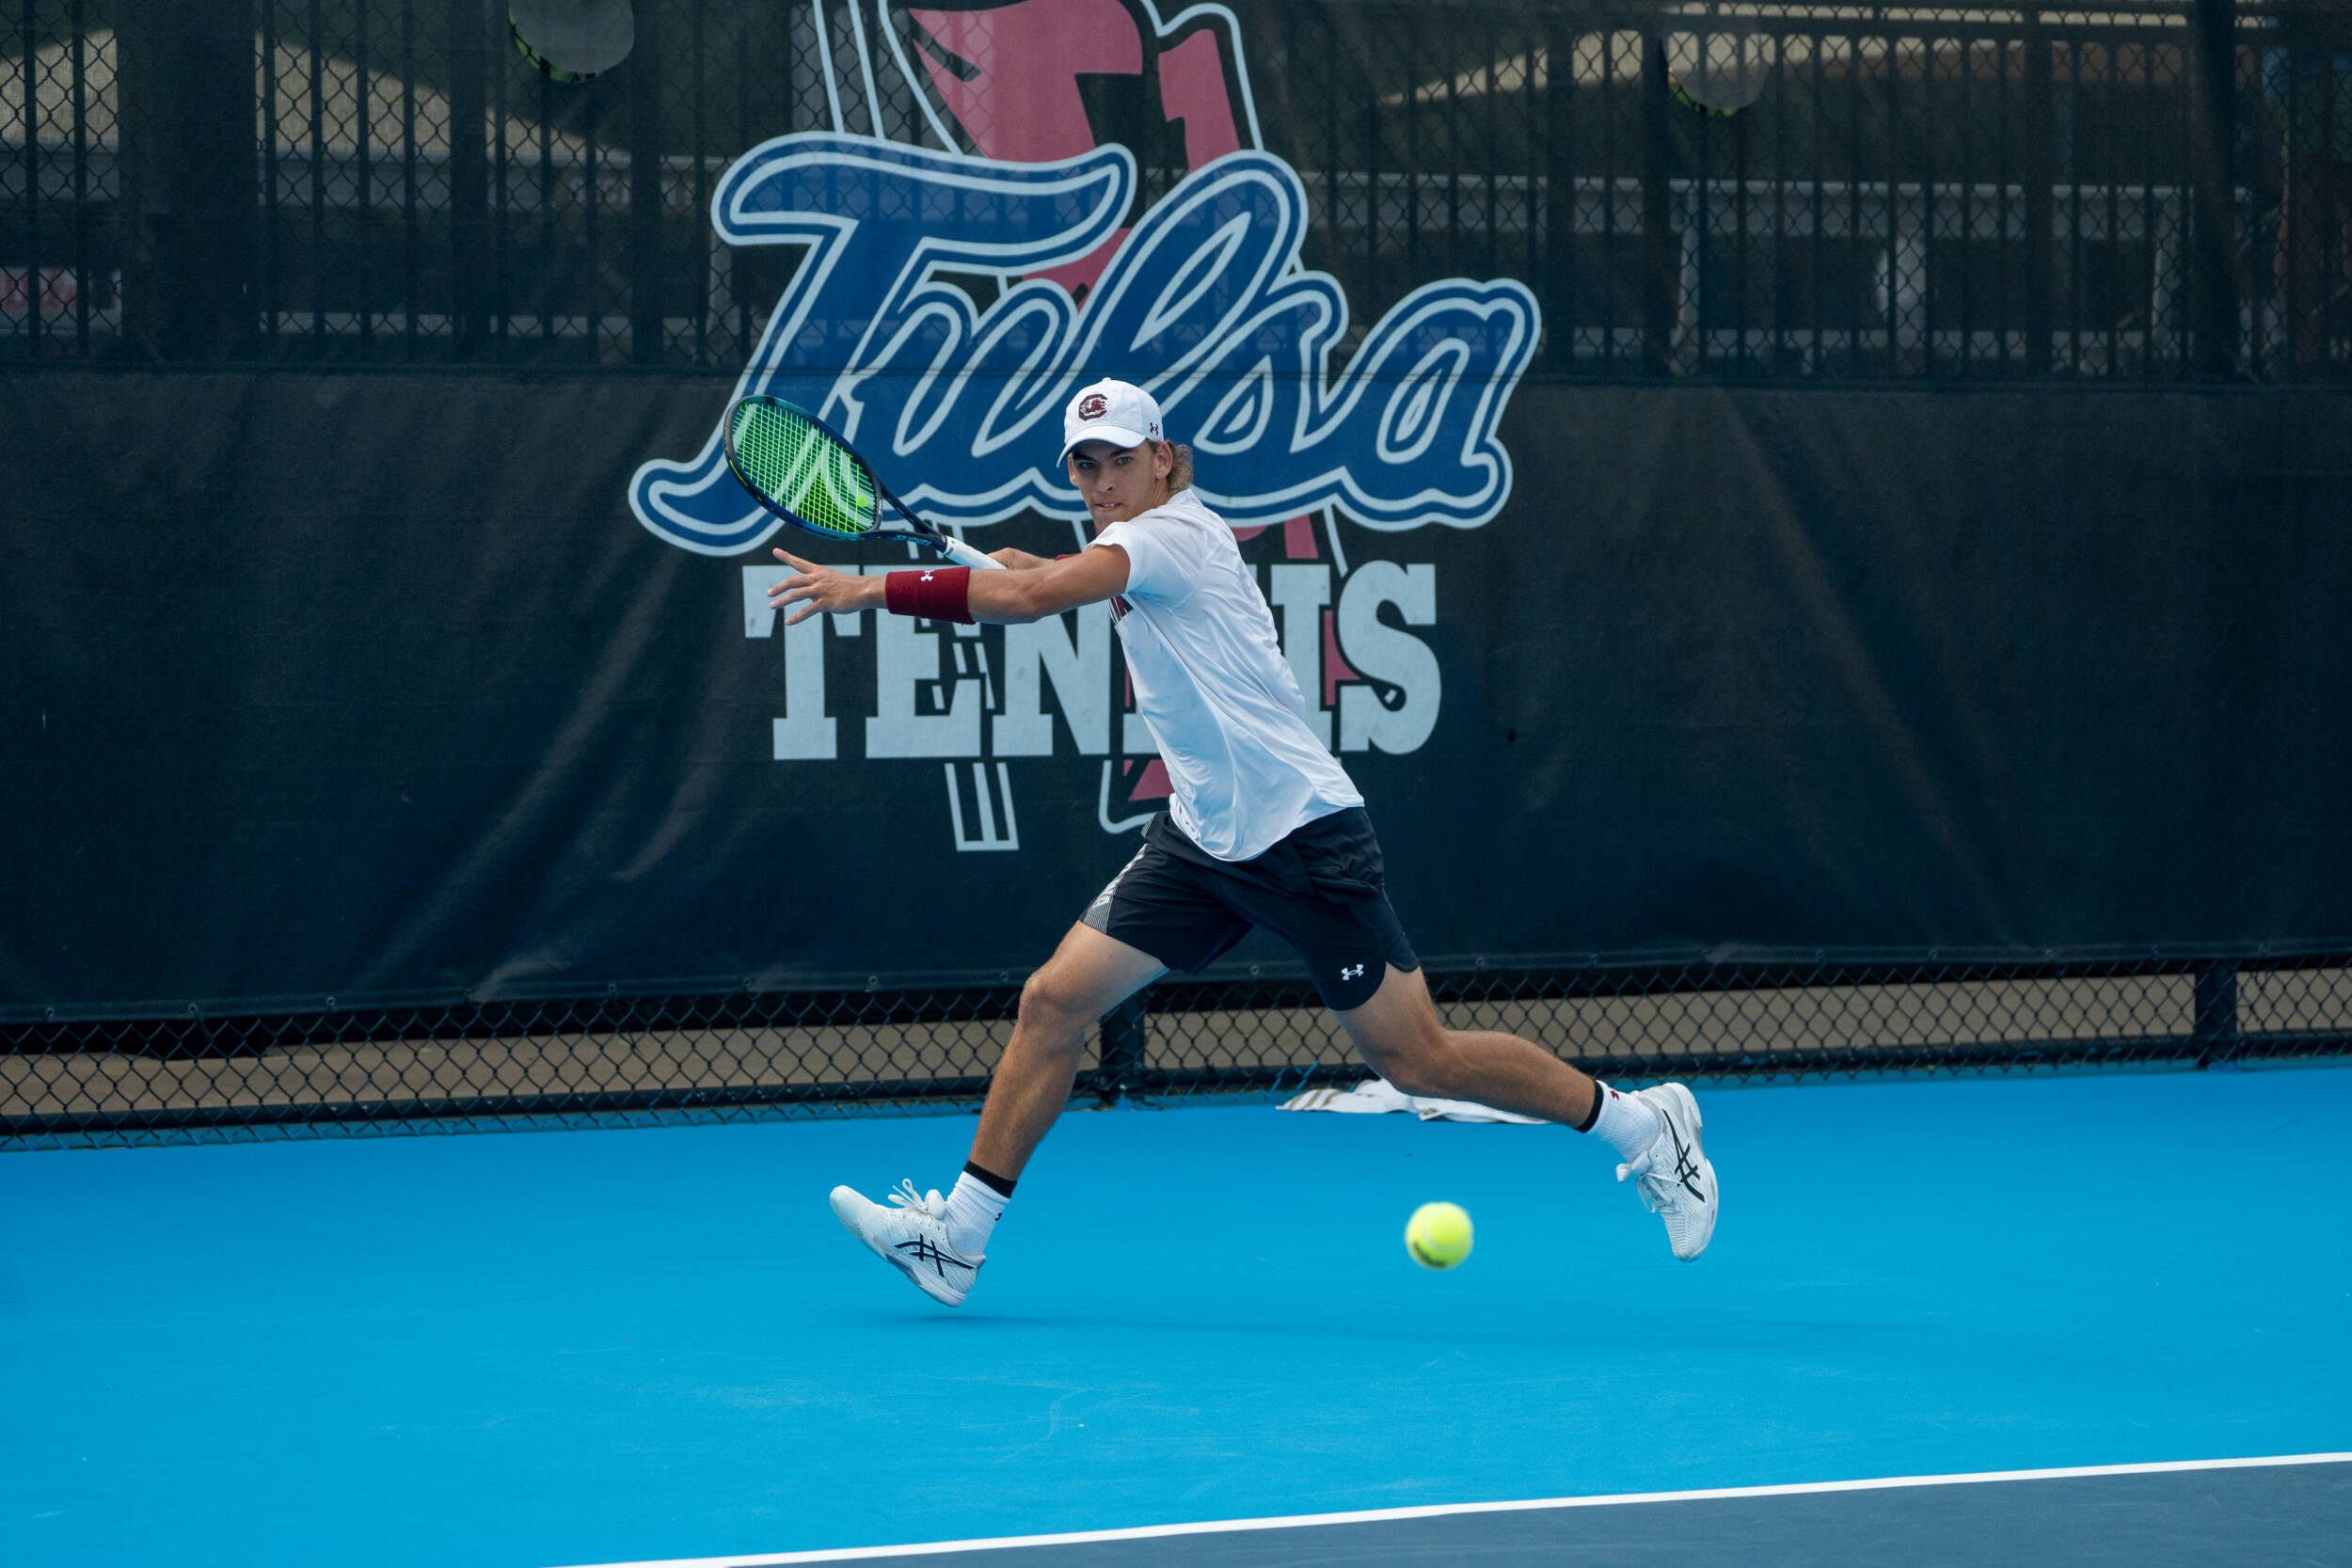 Hoole Picks up Spot in Main Draw, Upsets Top-15 Player